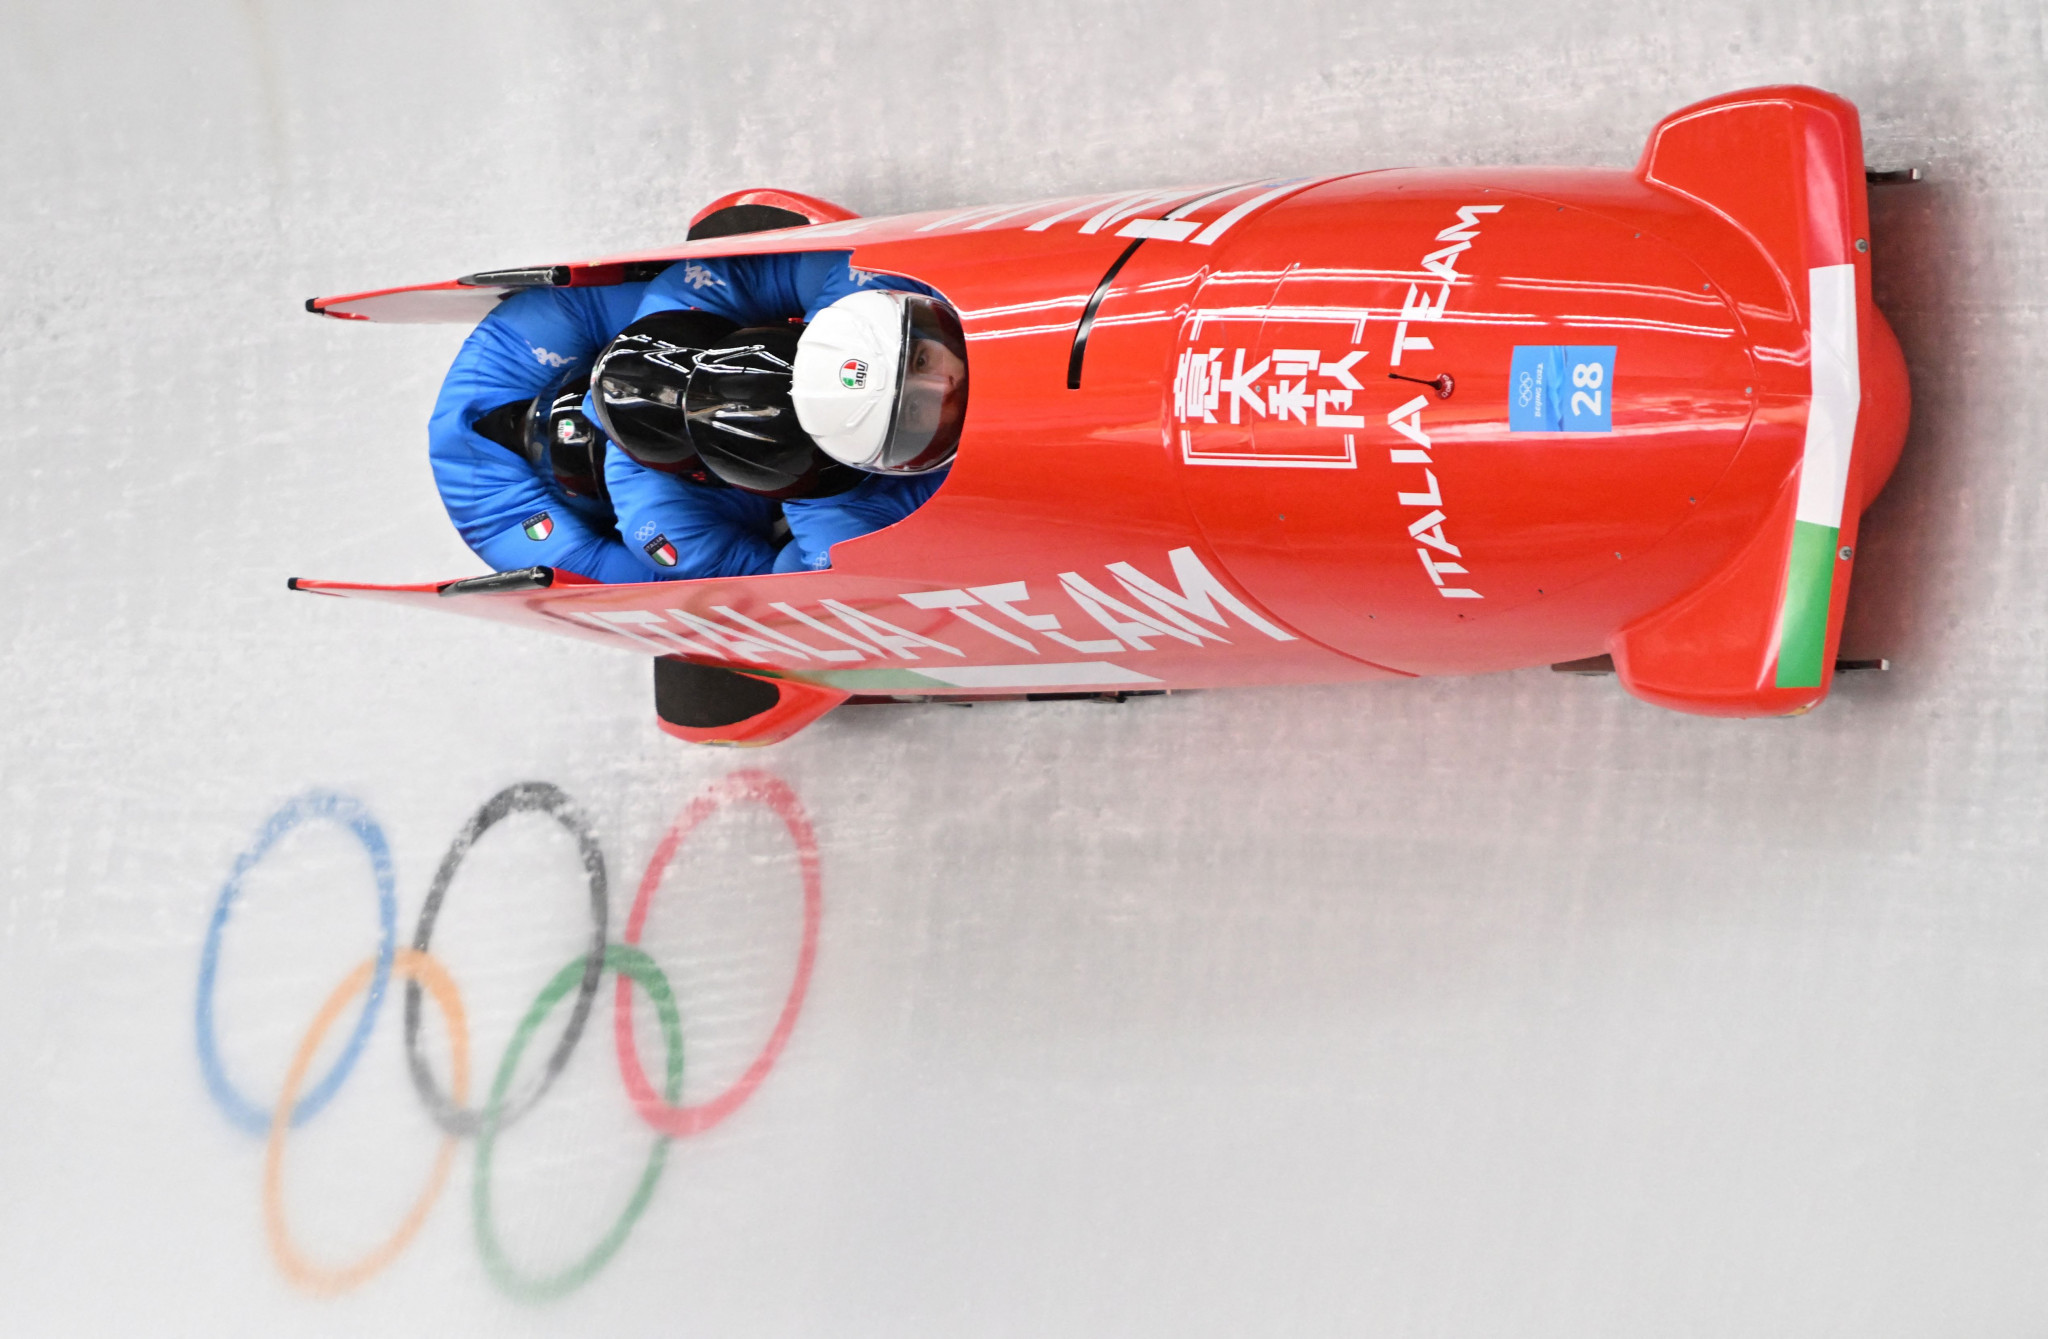 Italy continues recruitment drive for bobsleigh and skeleton athletes